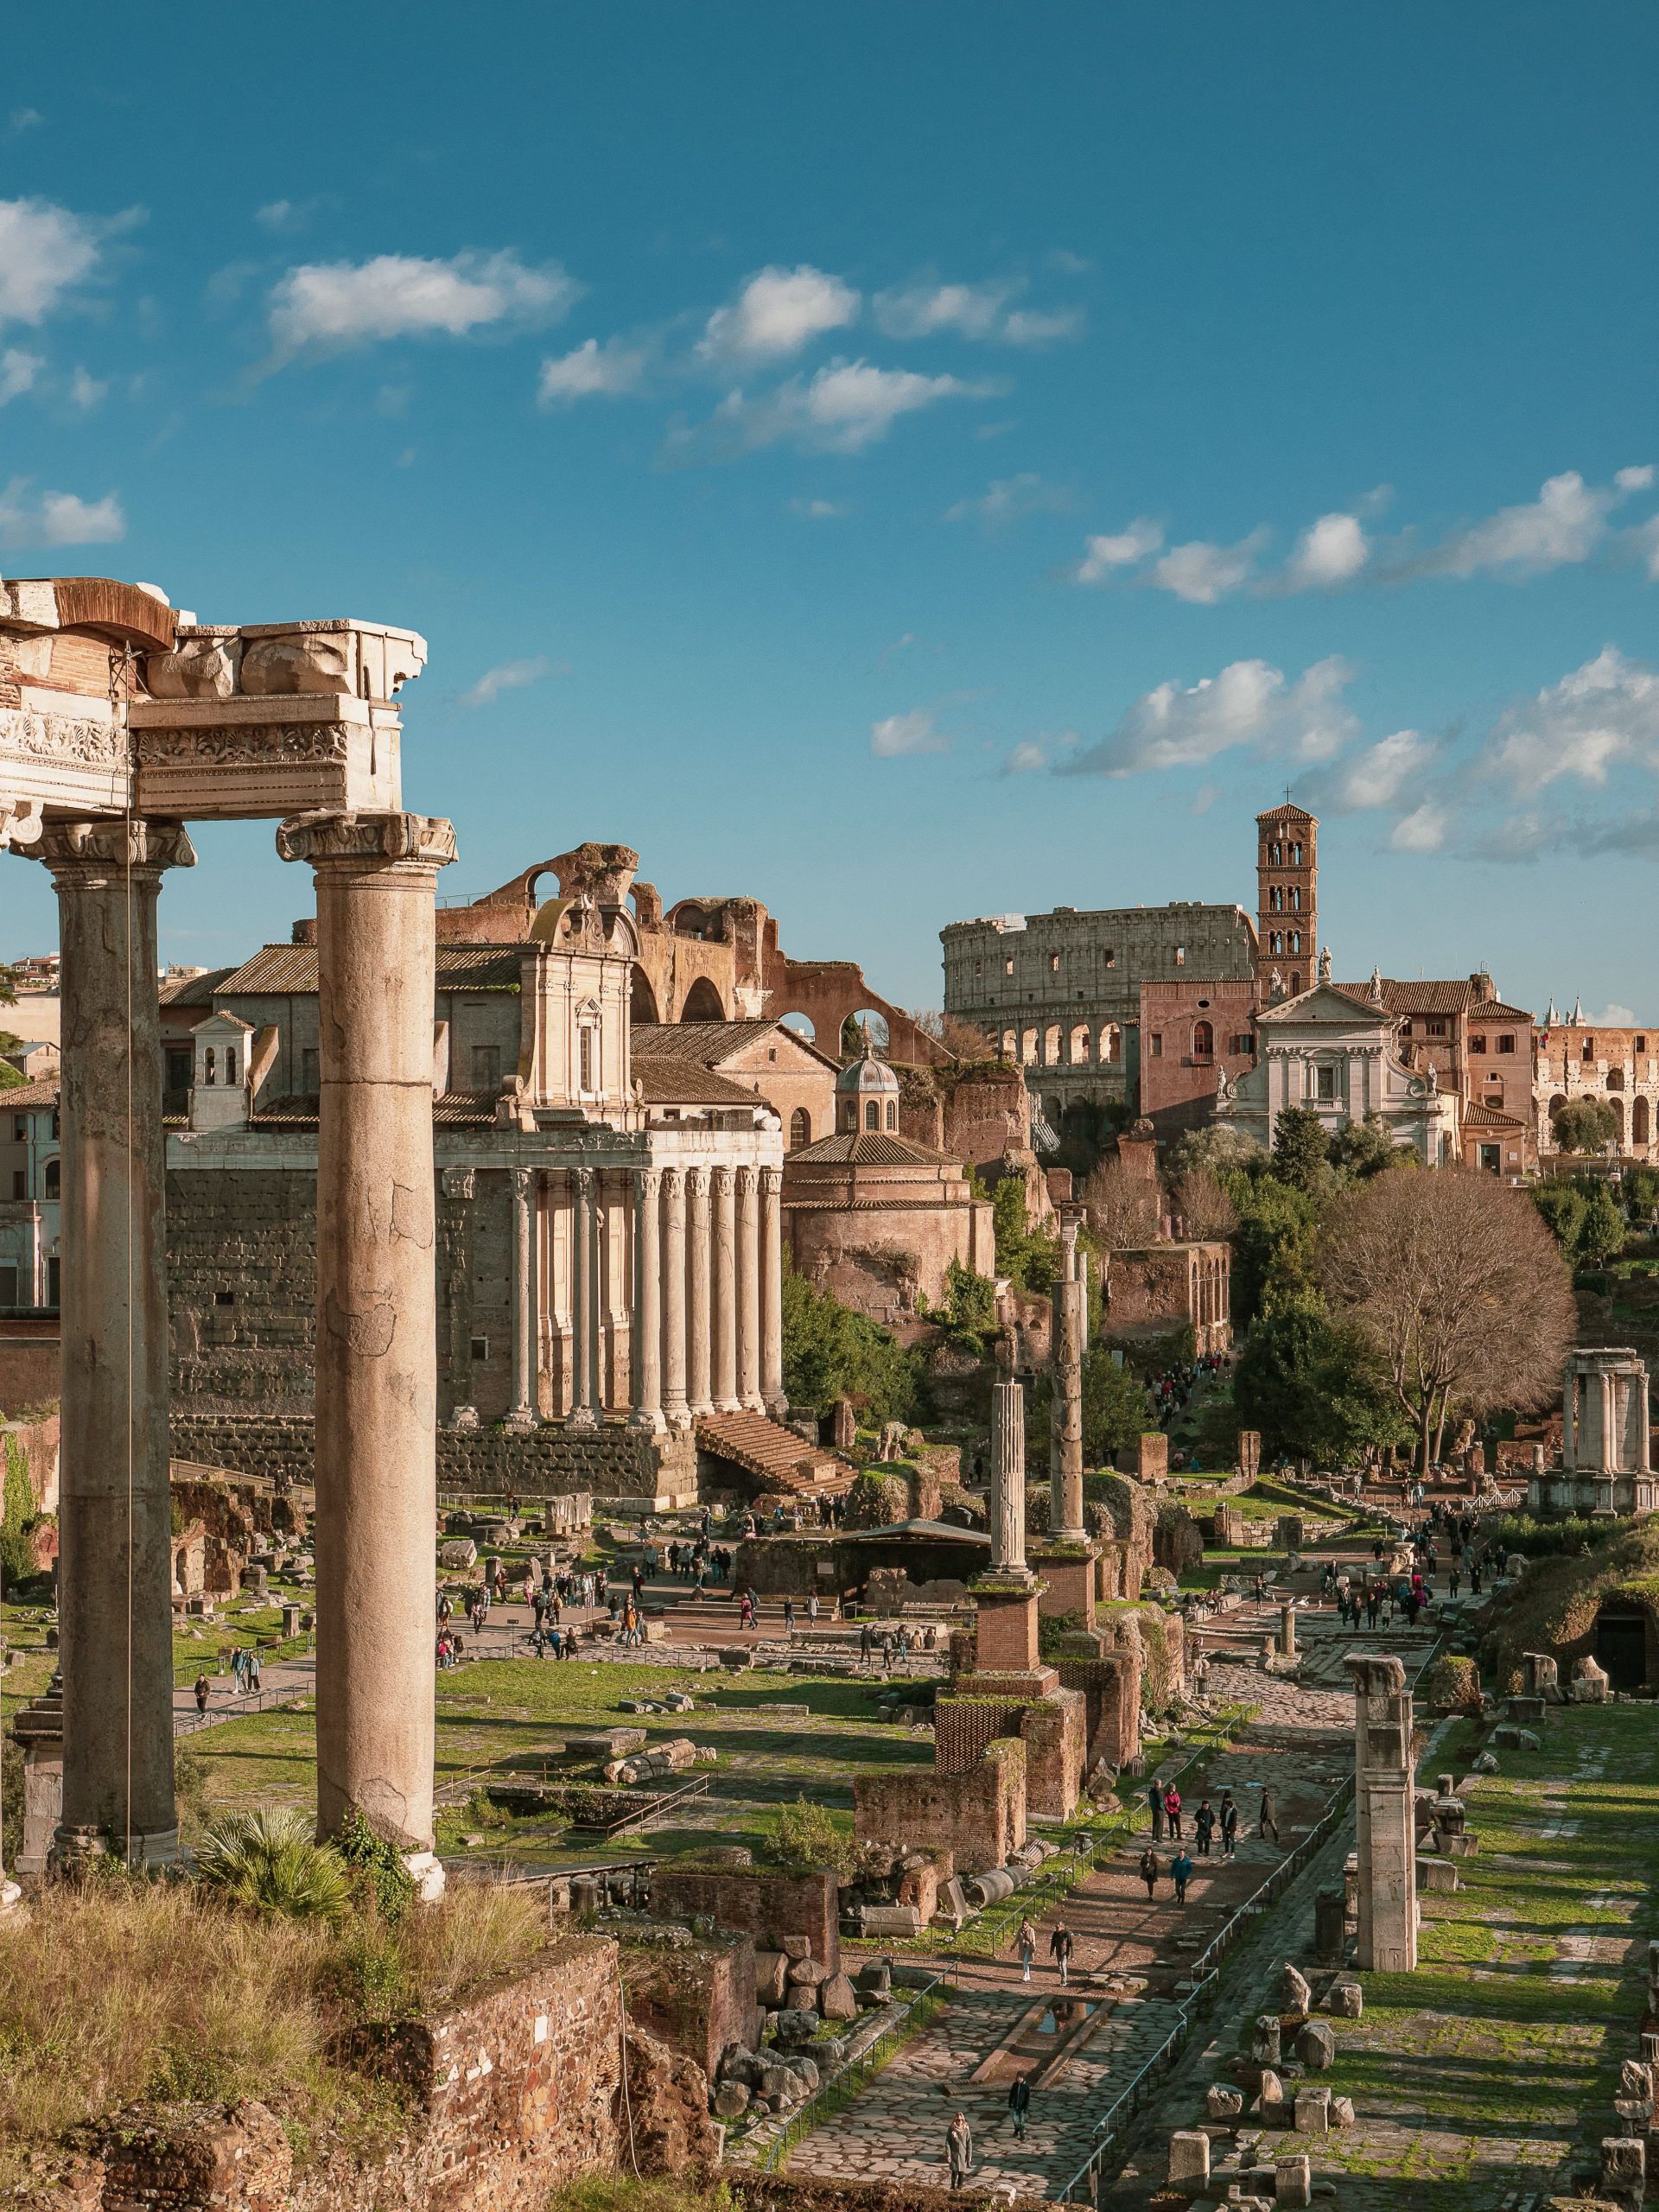 Fori Imperiali - Why You Should Visit Rome in 2023